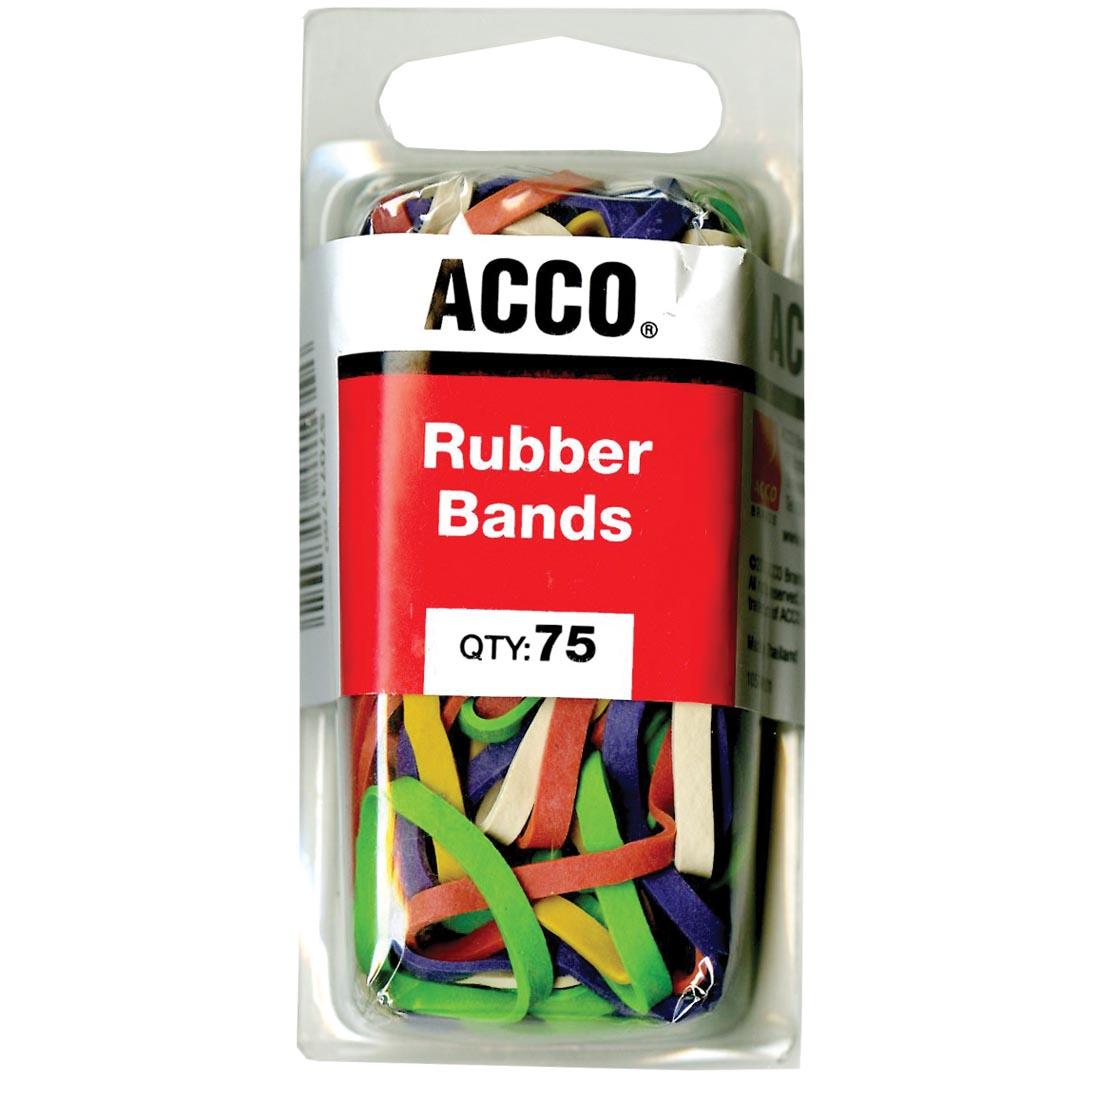 Package of Acco rubber bands